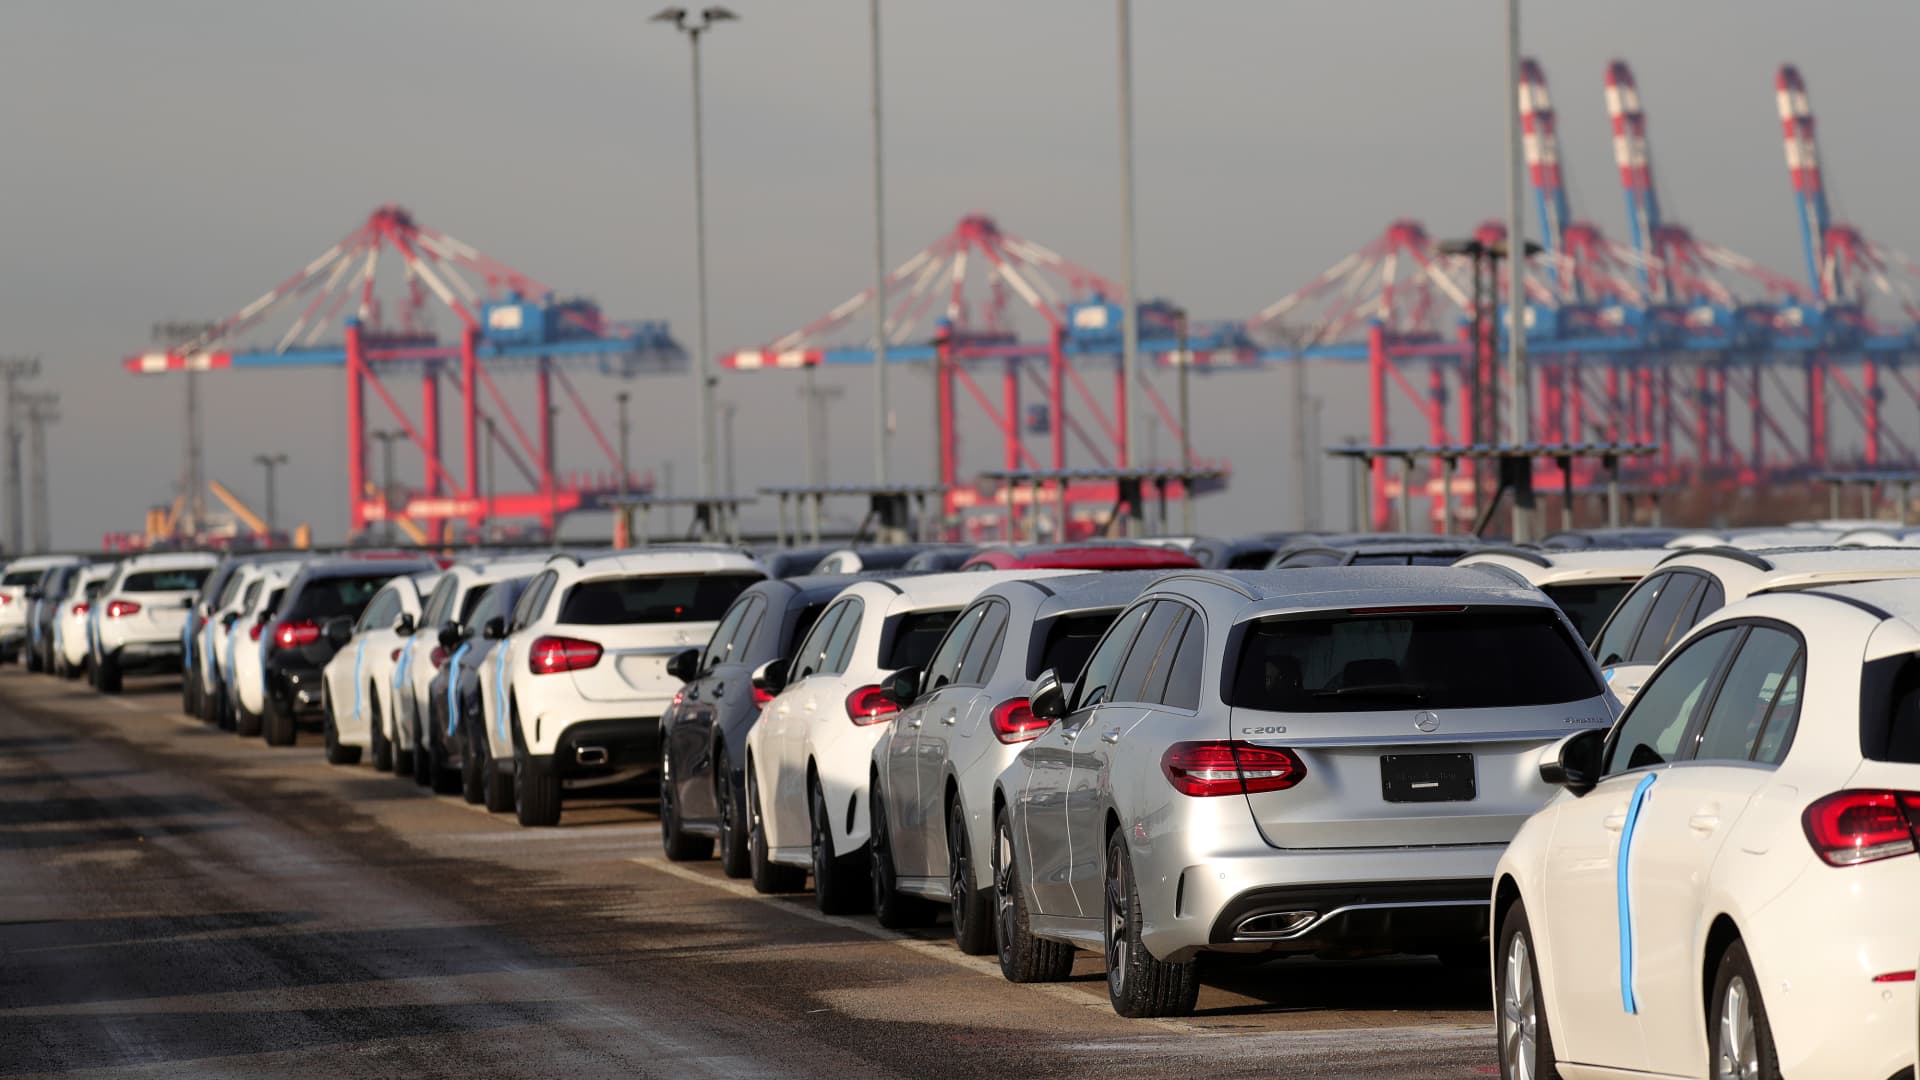 From Teslas to BMWs, automobiles are piling up on land and at sea in German port of Bremerhaven